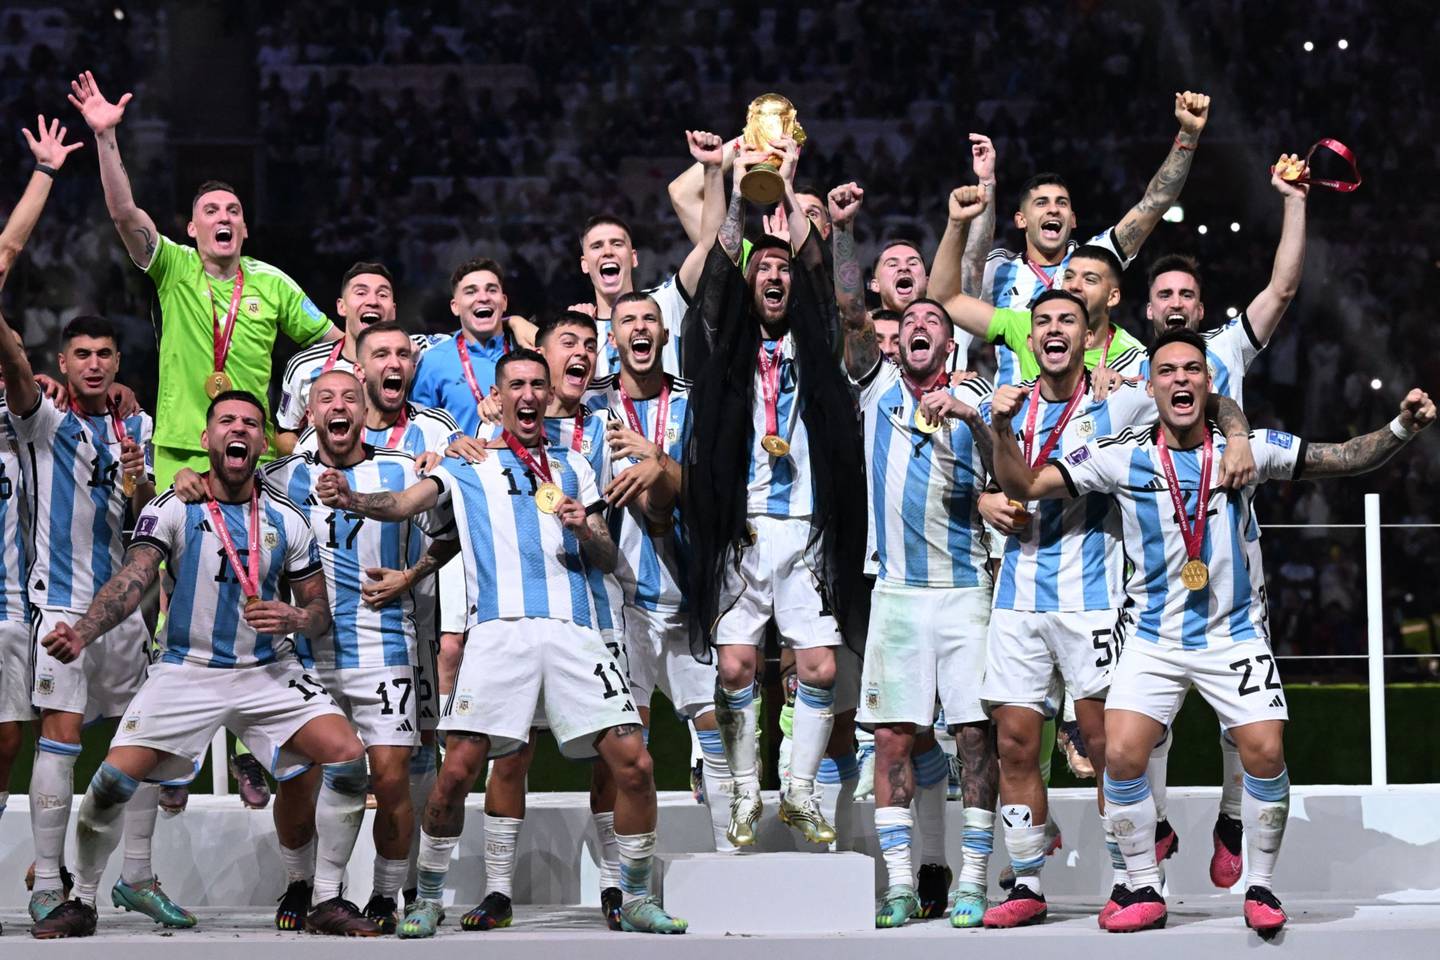 Argentina's captain and forward #10 Lionel Messi (C) lifts the FIFA World Cup Trophy as he celebrate with teammates winning the Qatar 2022 World Cup final football match between Argentina and France at Lusail Stadium in Lusail, north of Doha on December 18, 2022.  Photographer: Kirill Kudryavtsev/AFP/Getty Images